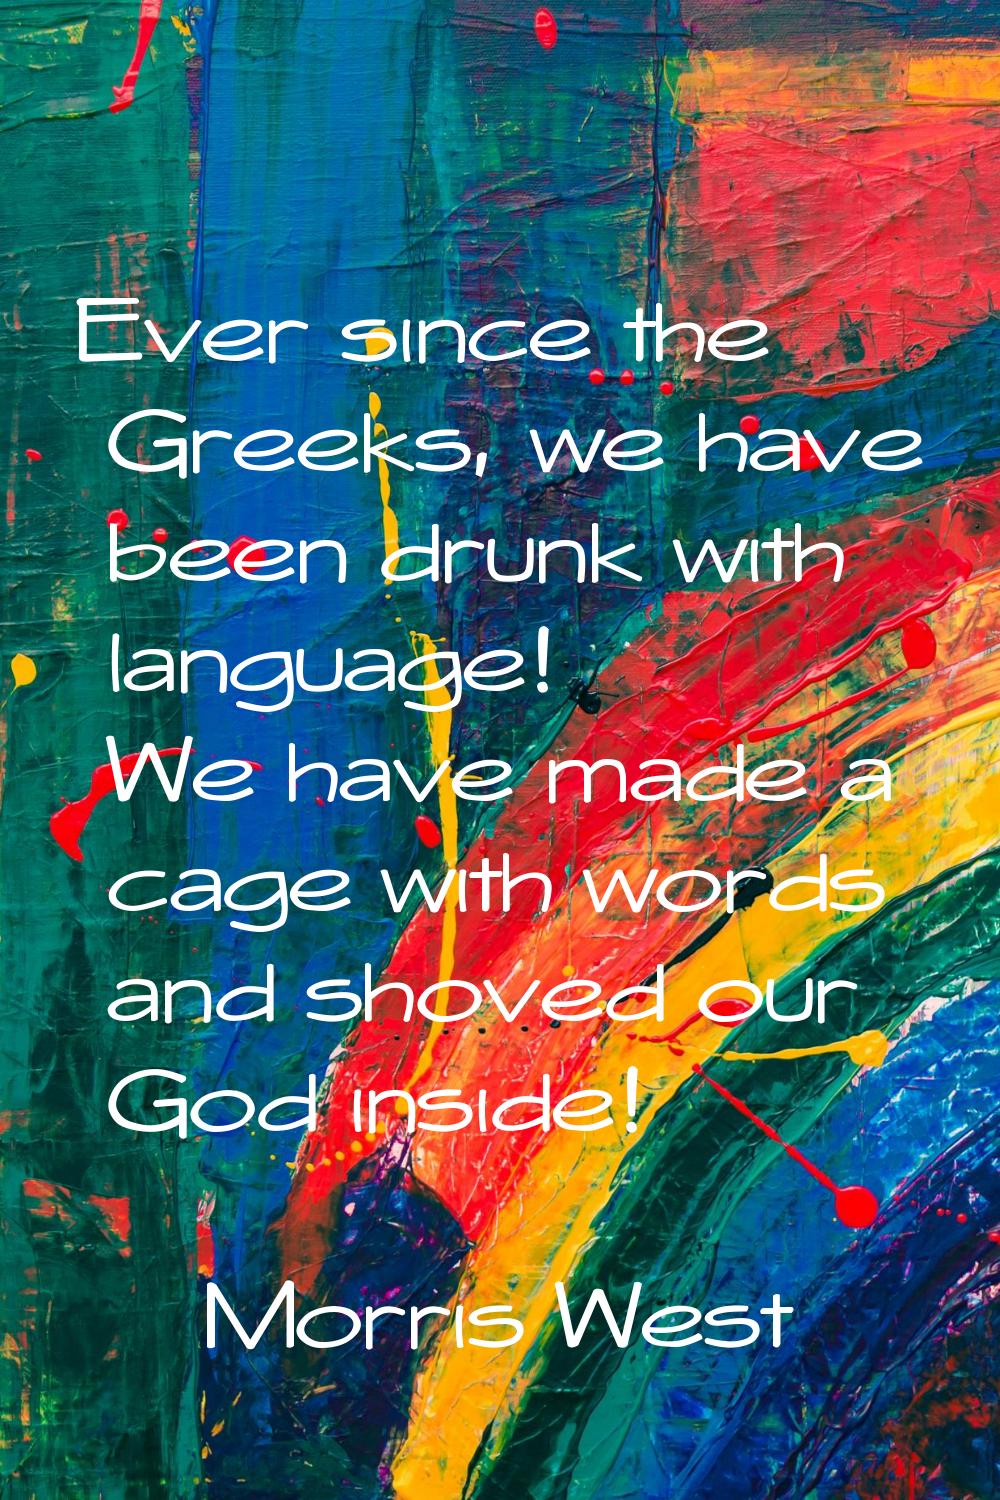 Ever since the Greeks, we have been drunk with language! We have made a cage with words and shoved 